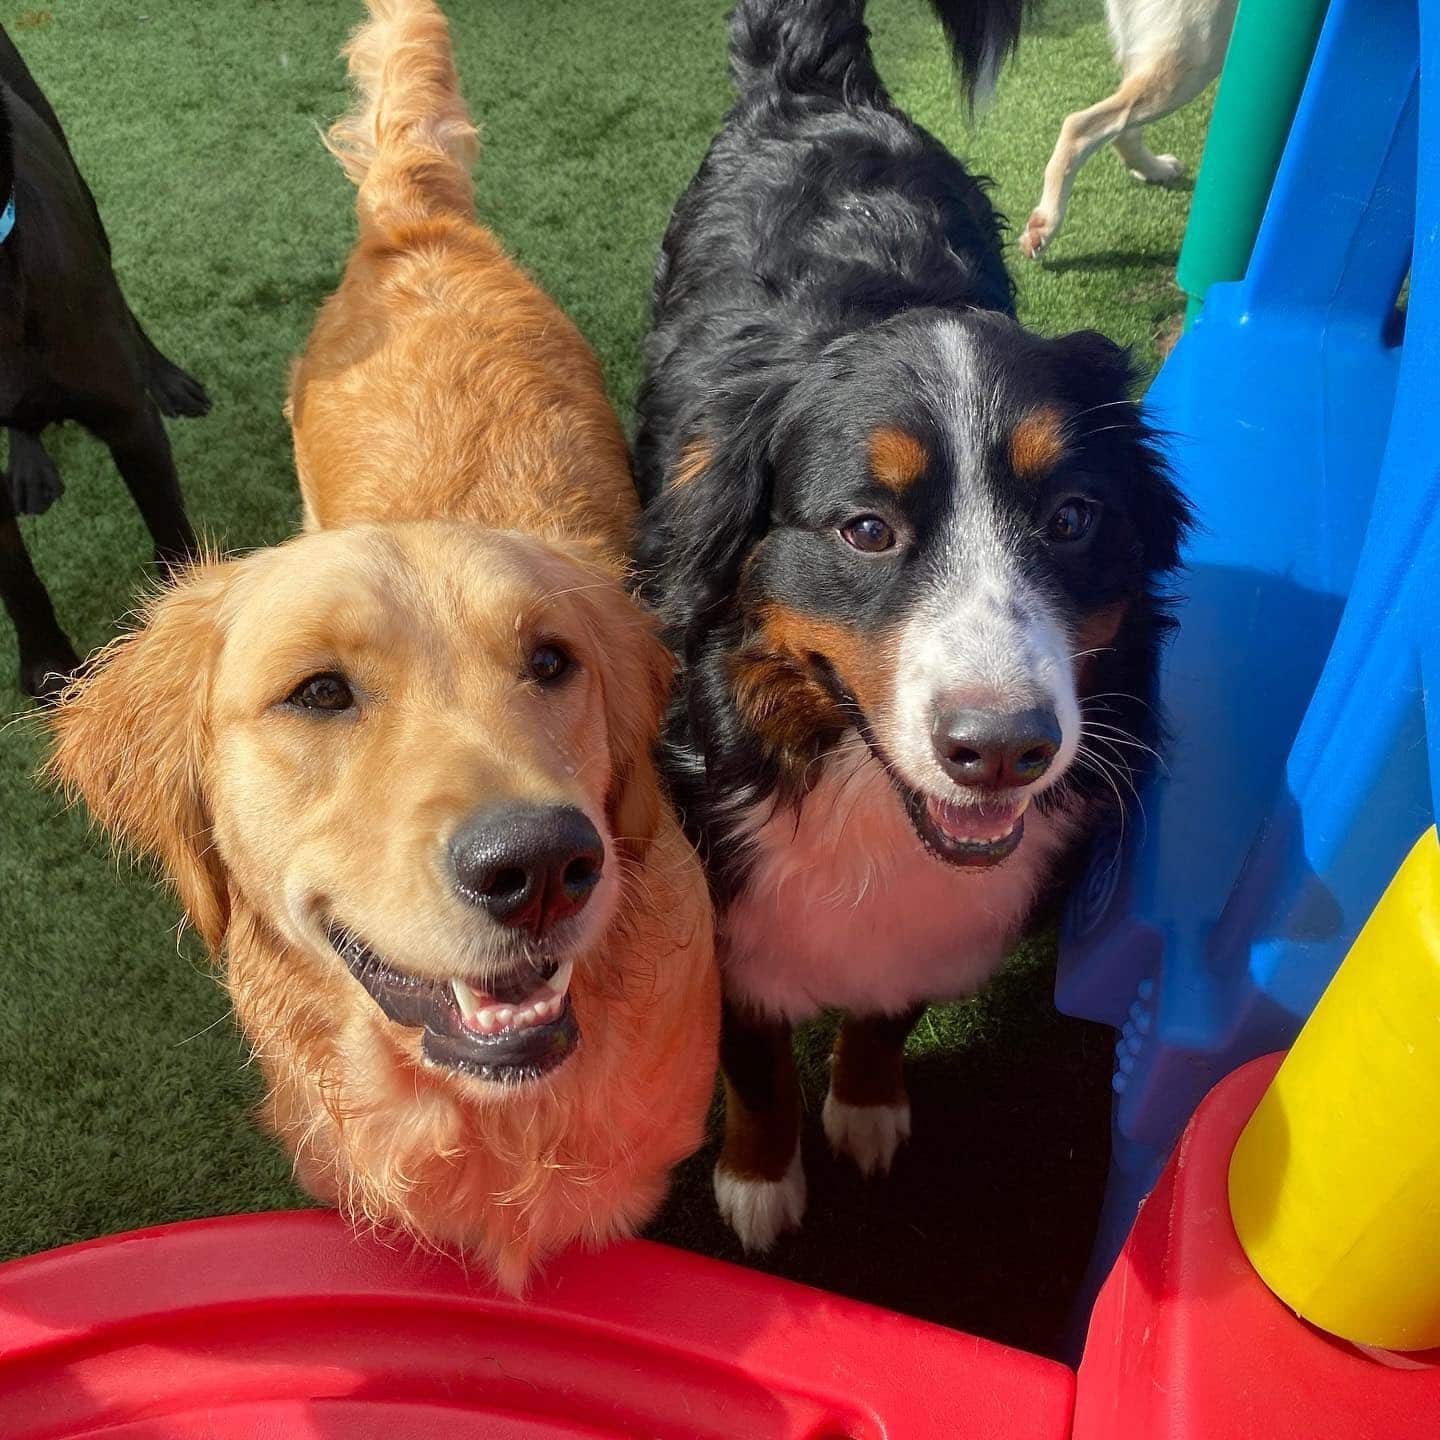 Two happy dog friends at Hounds Lounge Doggie Daycare